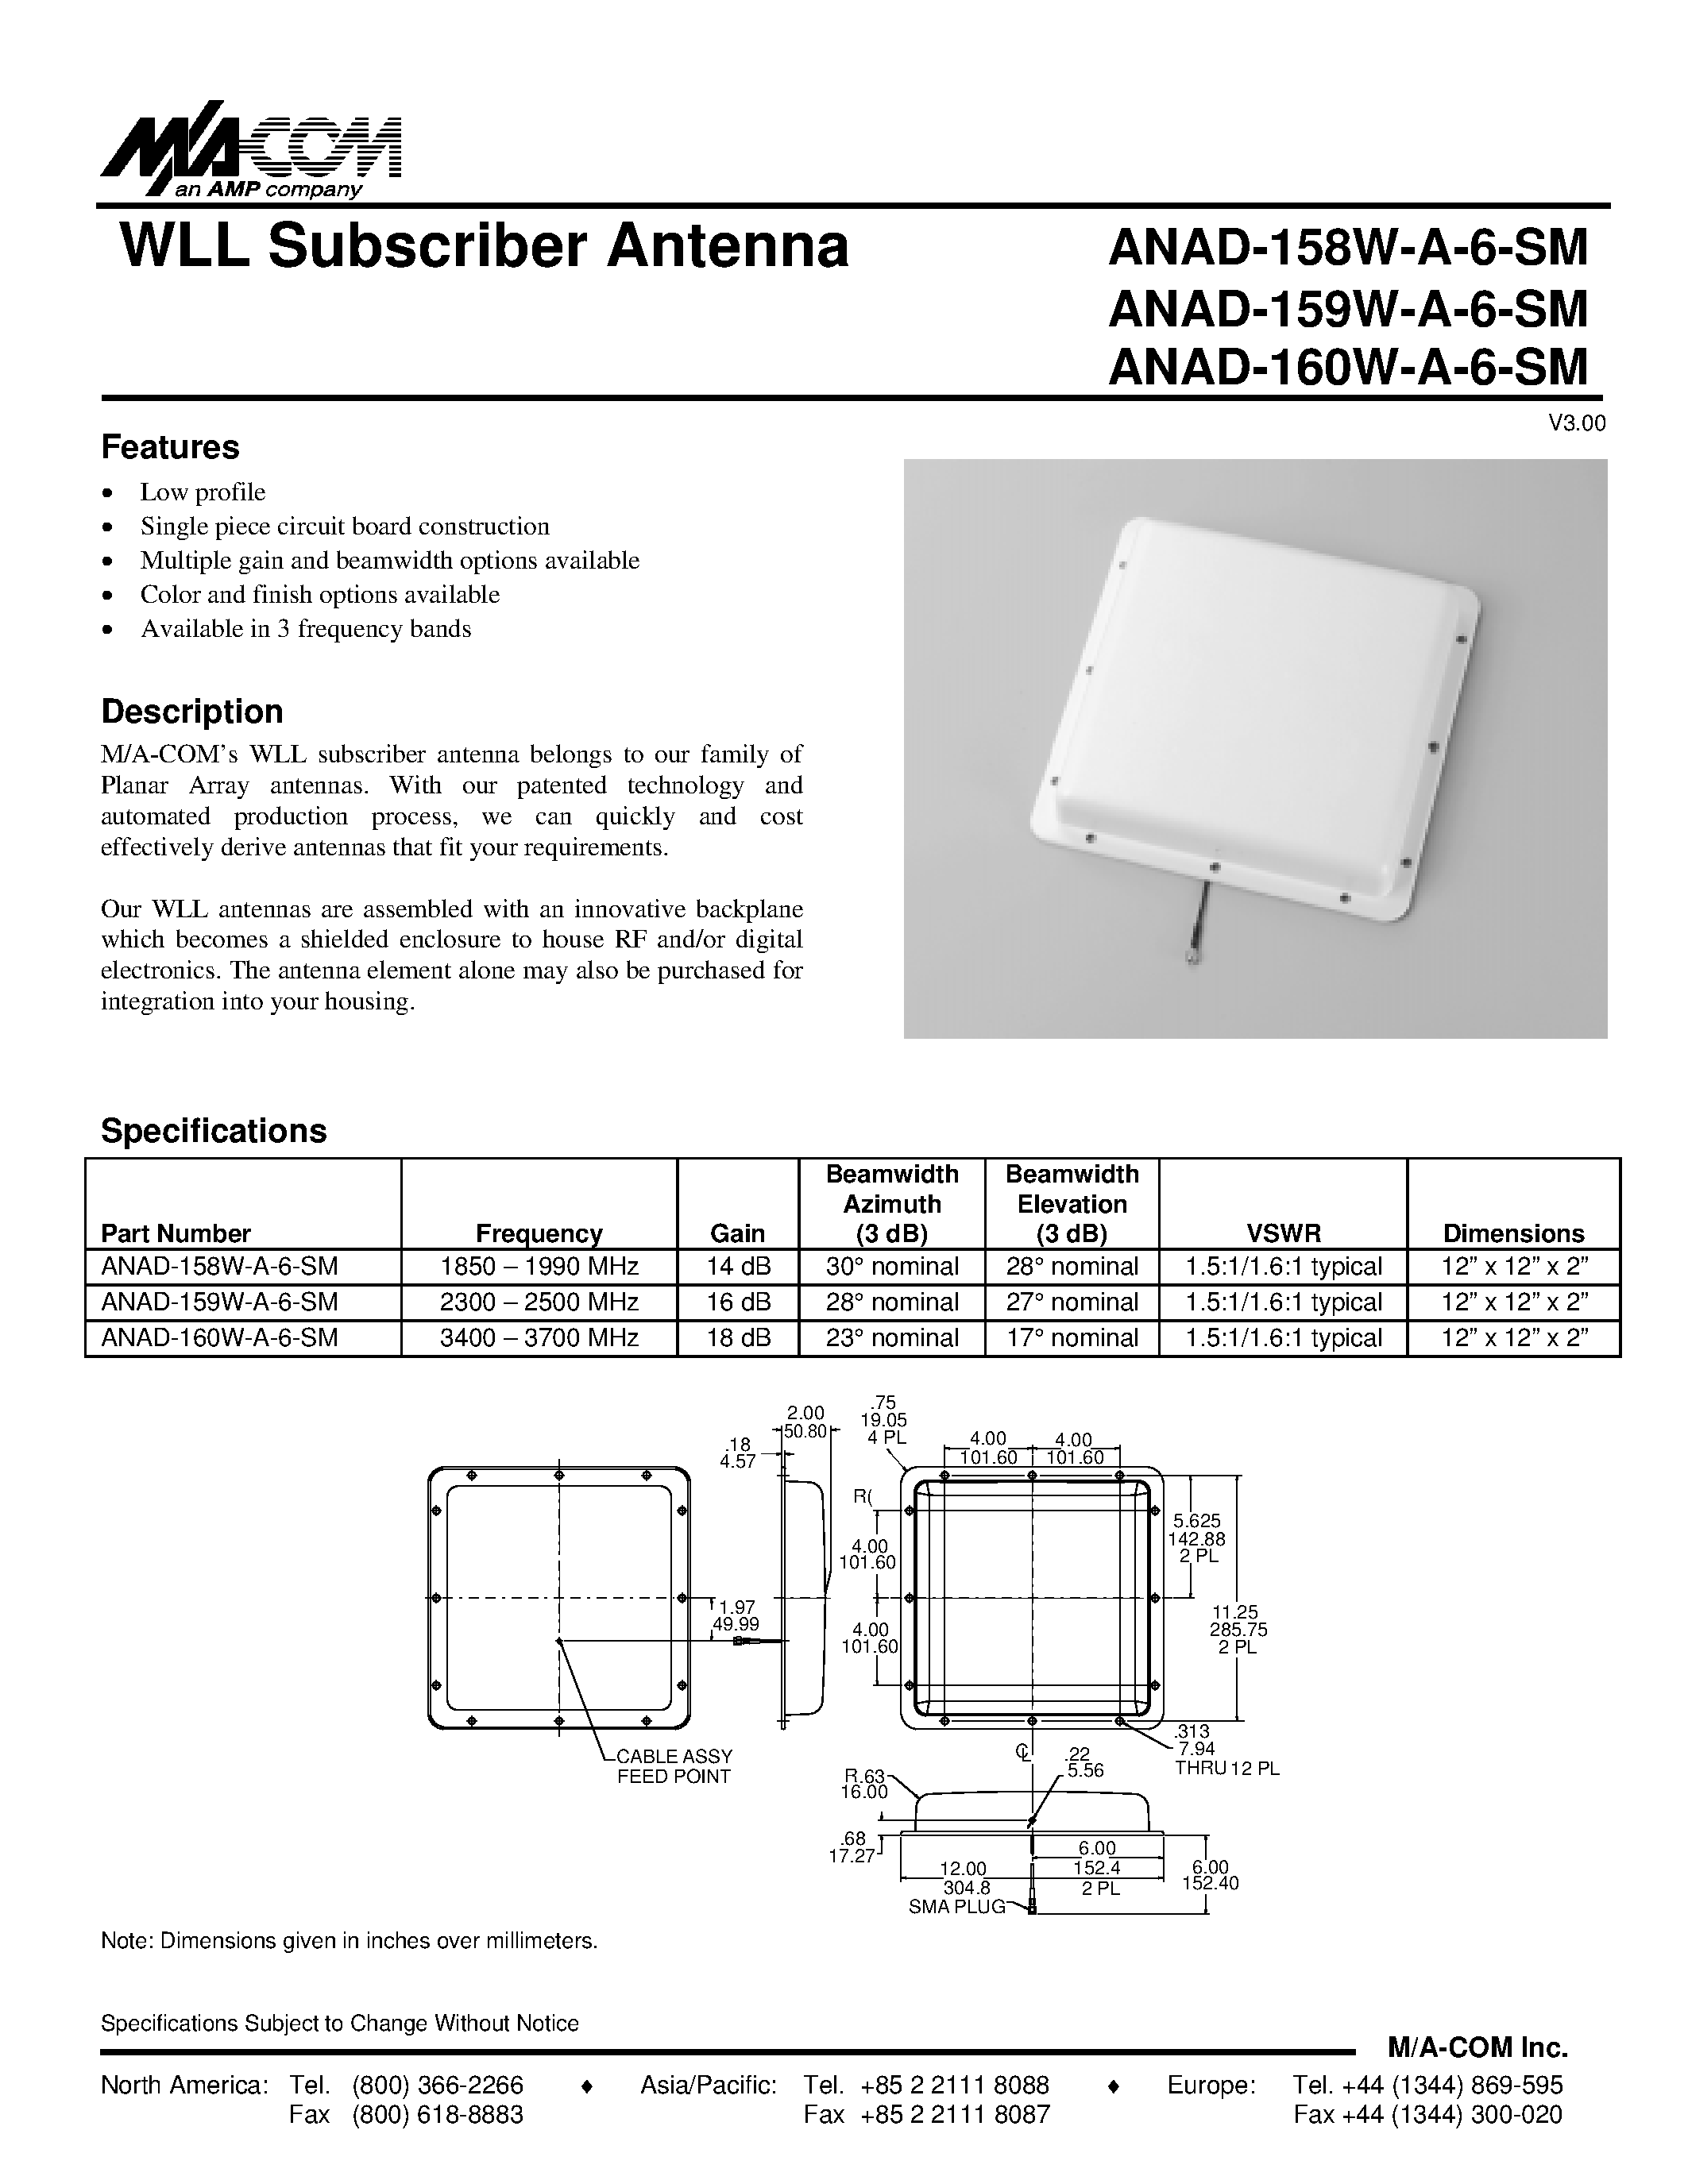 Datasheet ANAD-160W-A-6-SM - WLL Subscriber Antenna page 1